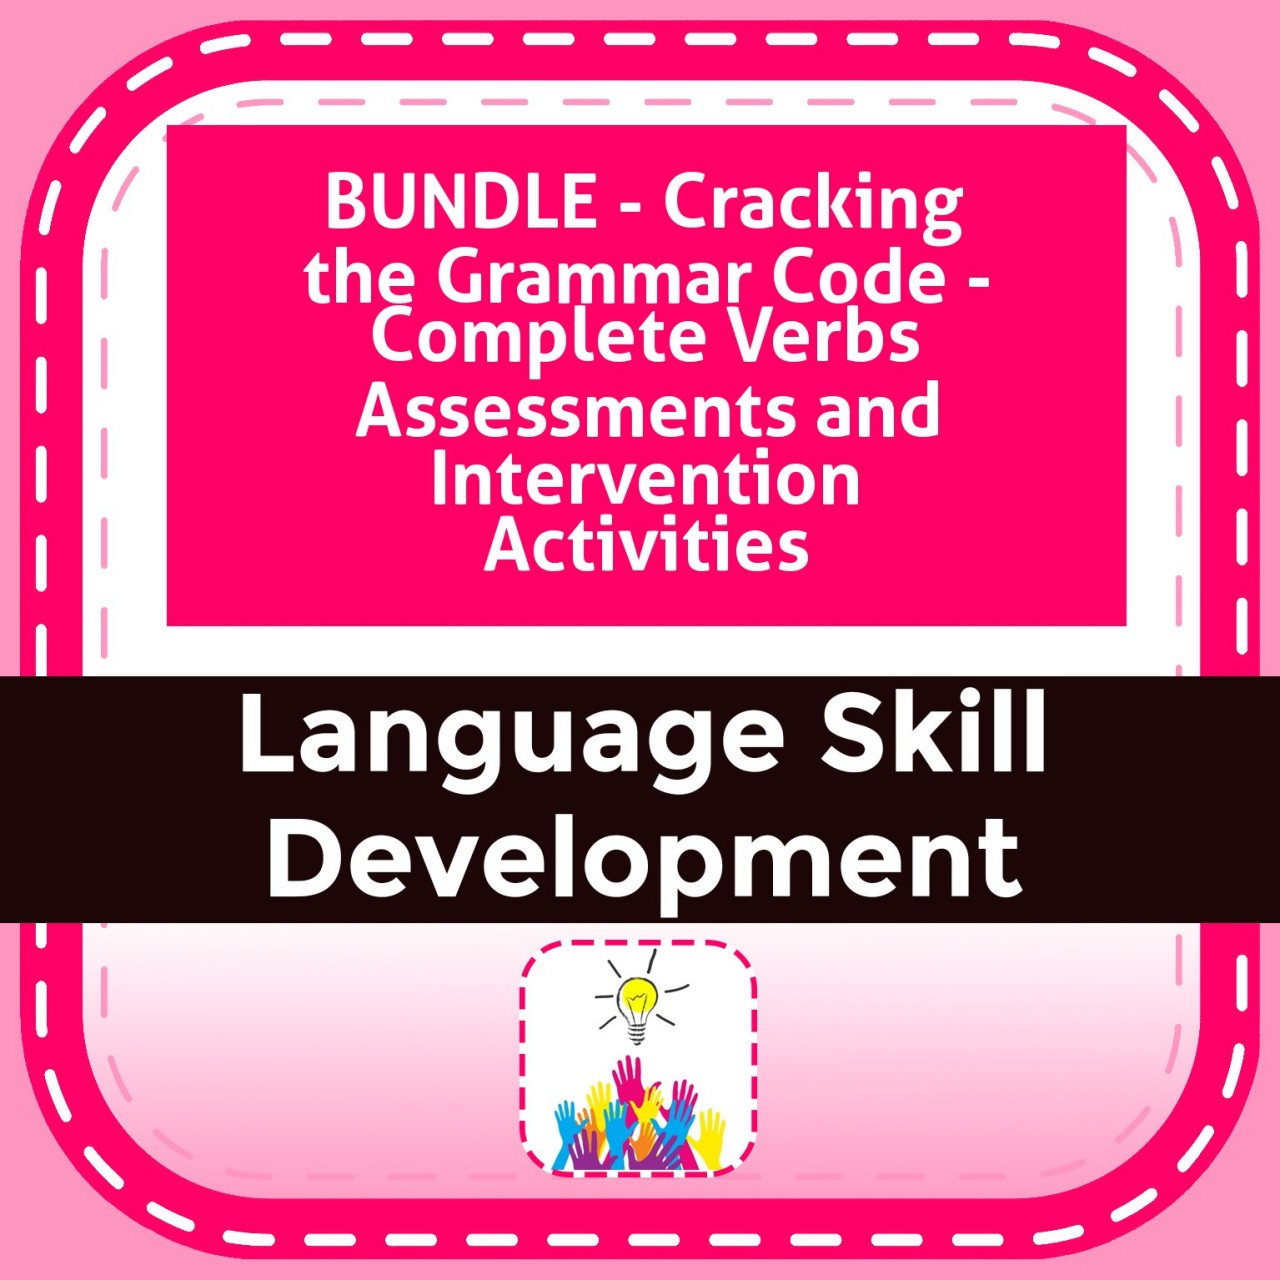 BUNDLE - Cracking the Grammar Code - Complete Verbs Assessments and Intervention Activities